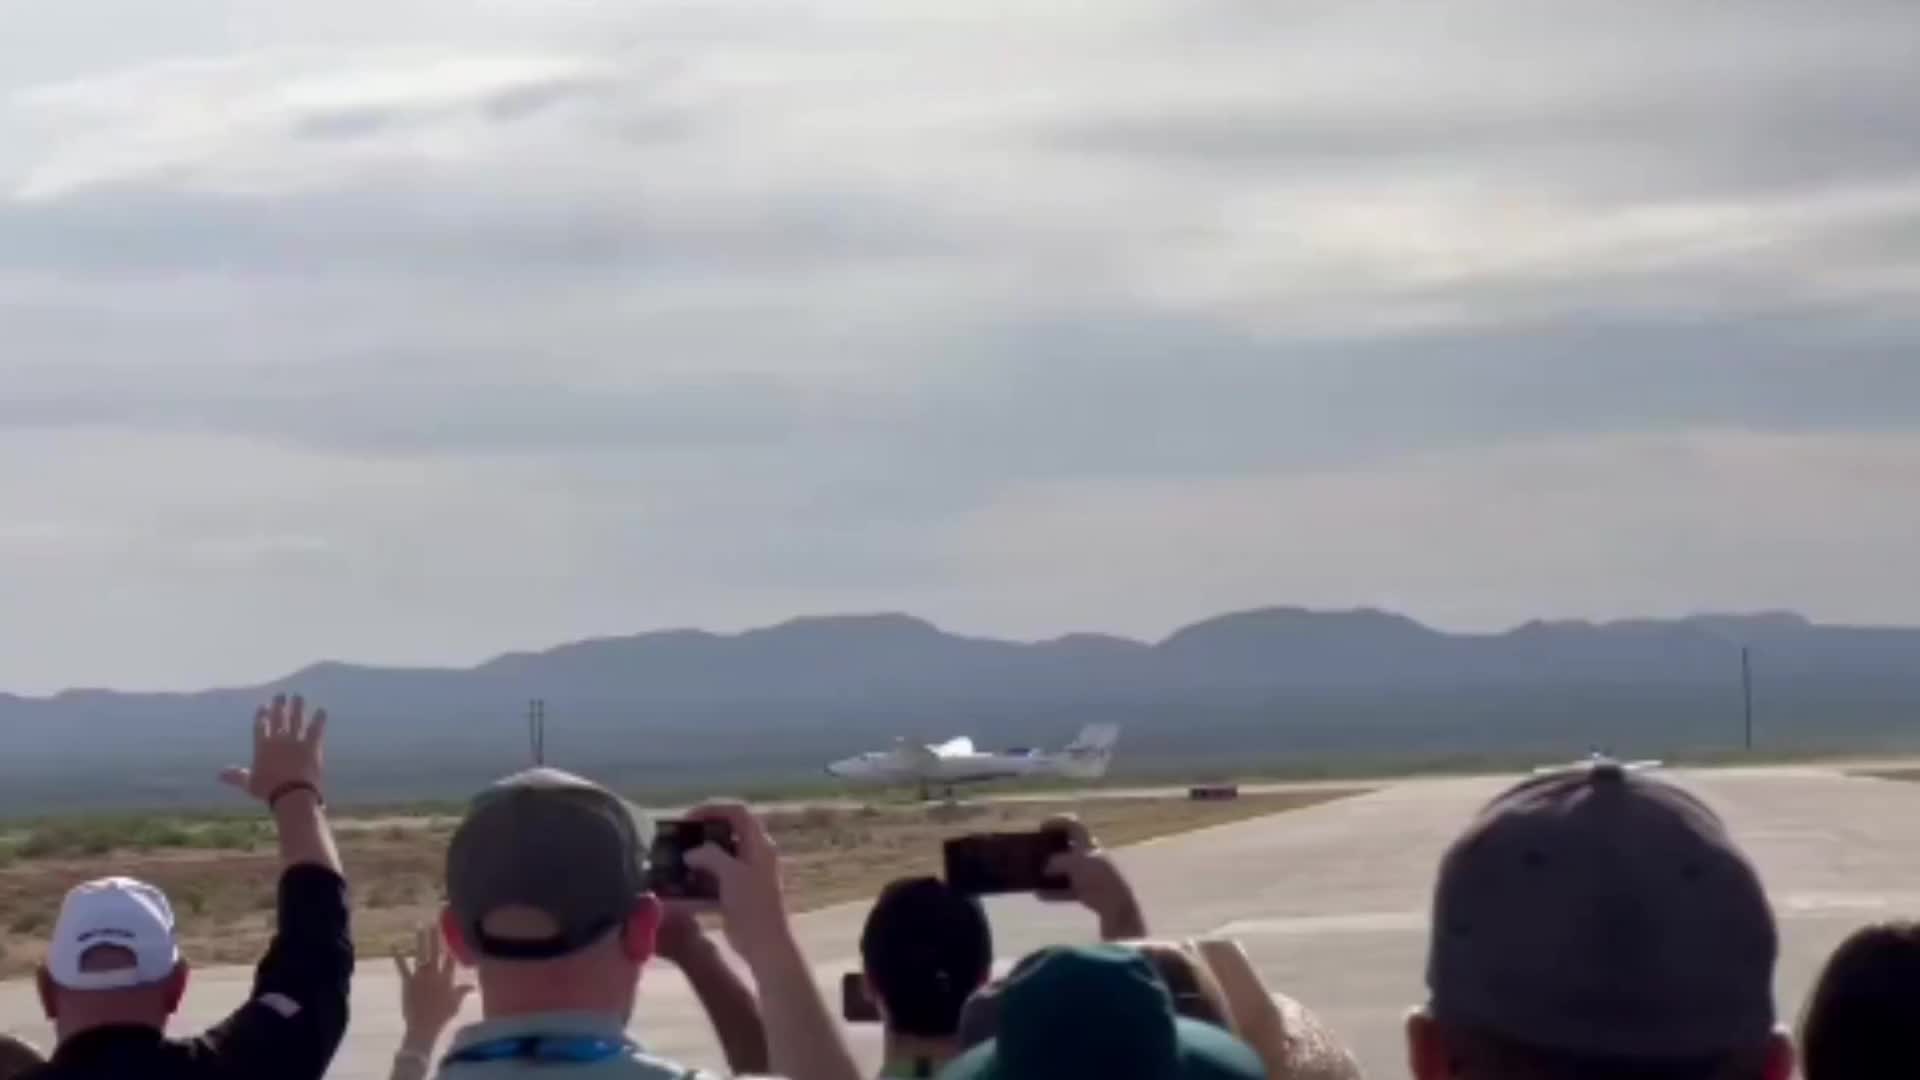 Successful take-off from @Spaceport_NM confirmed! Let’s go #Galactic07!